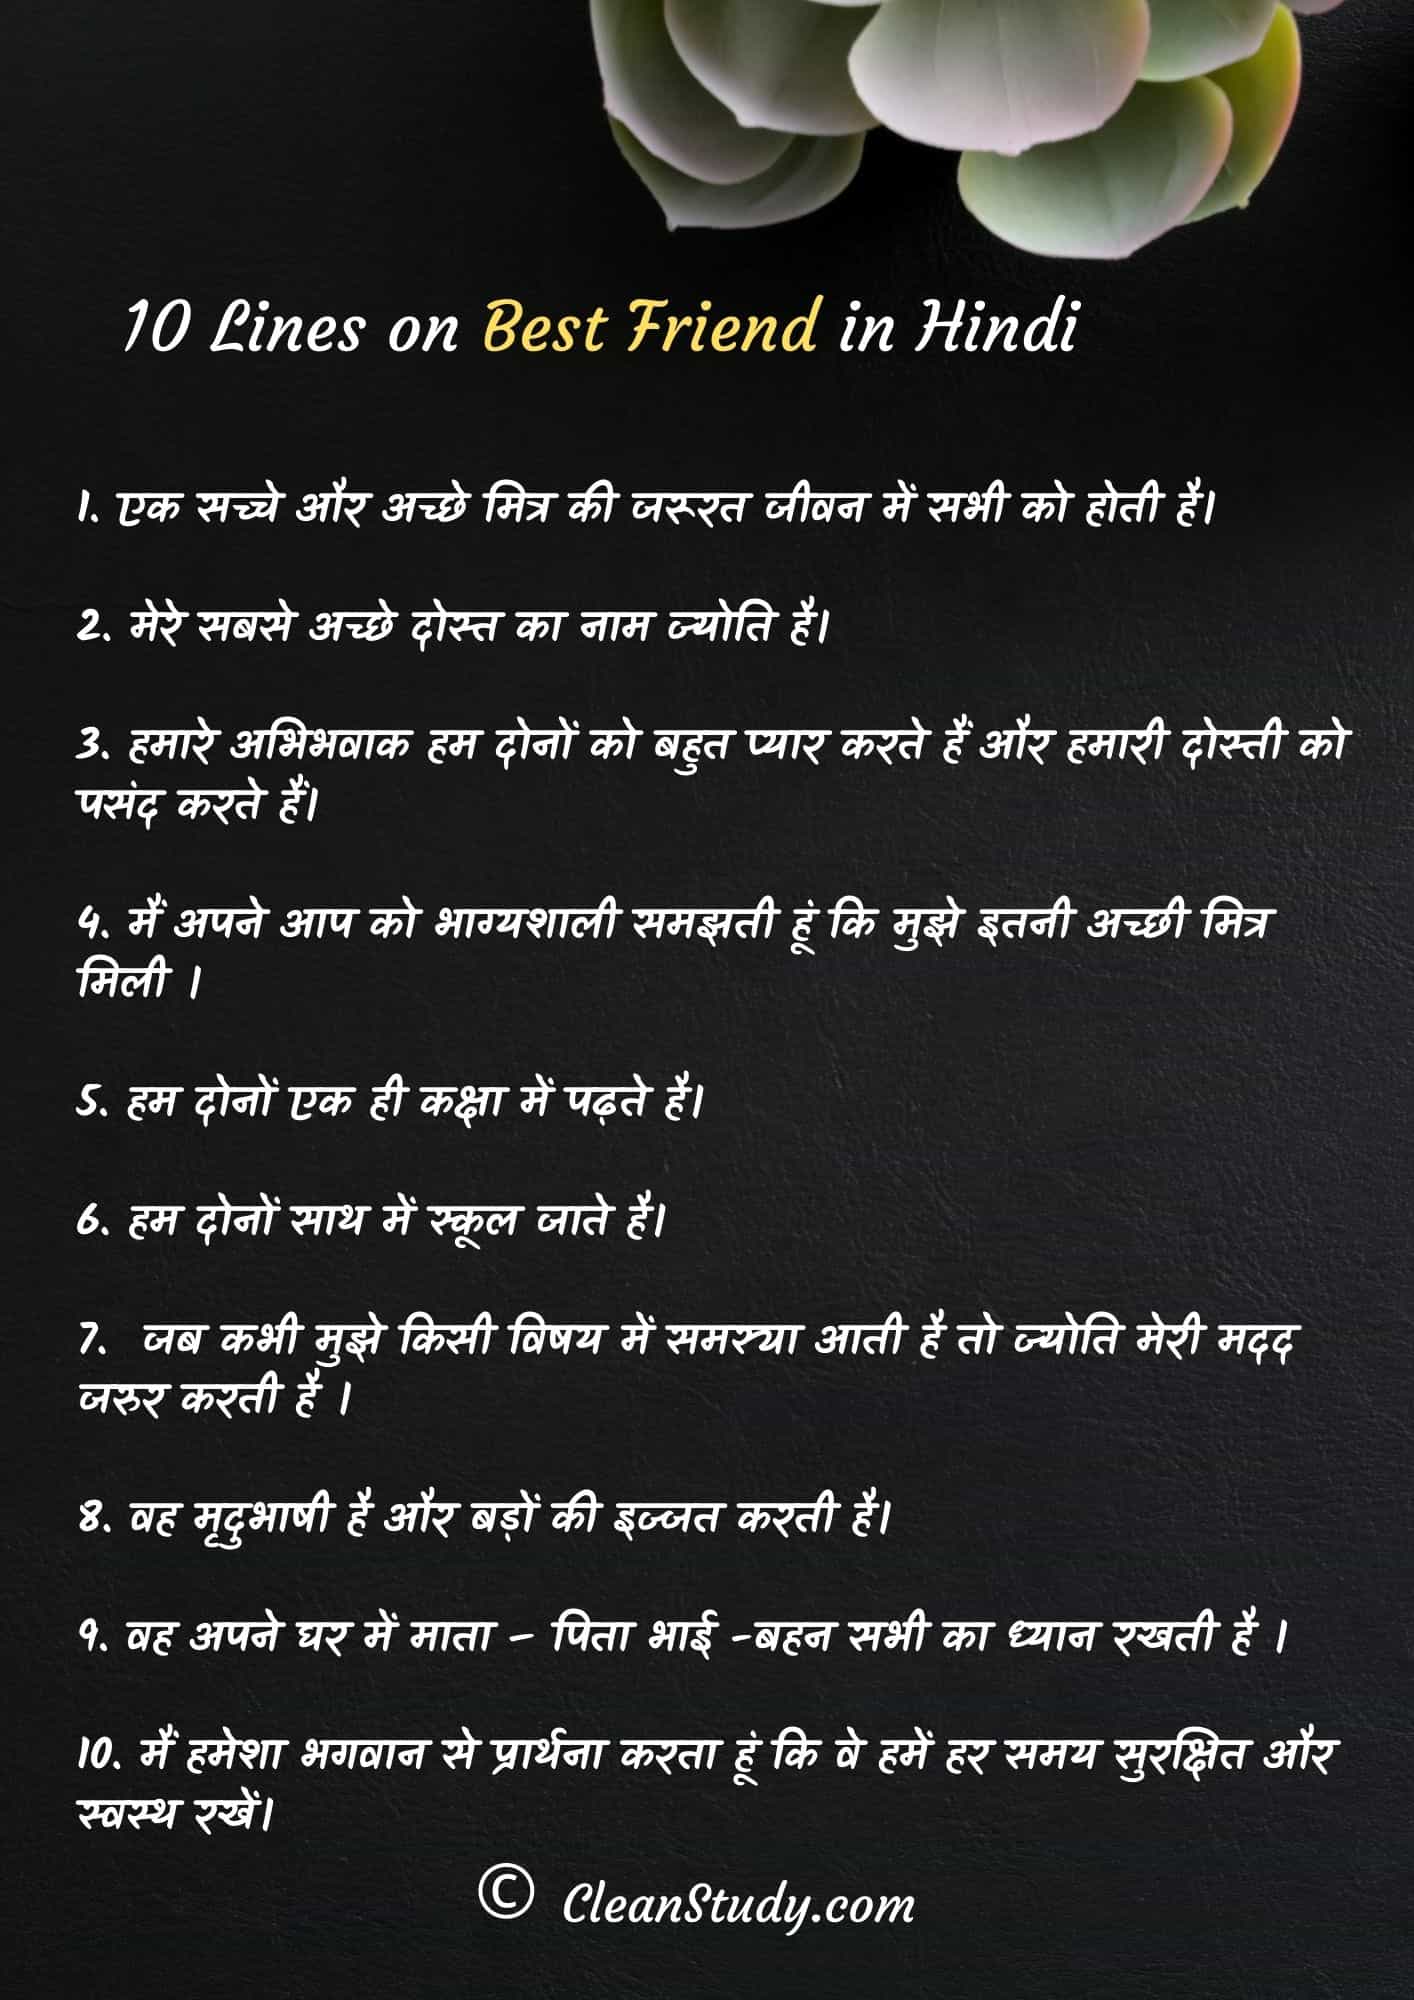 10 Lines on Best Friend in Hindi